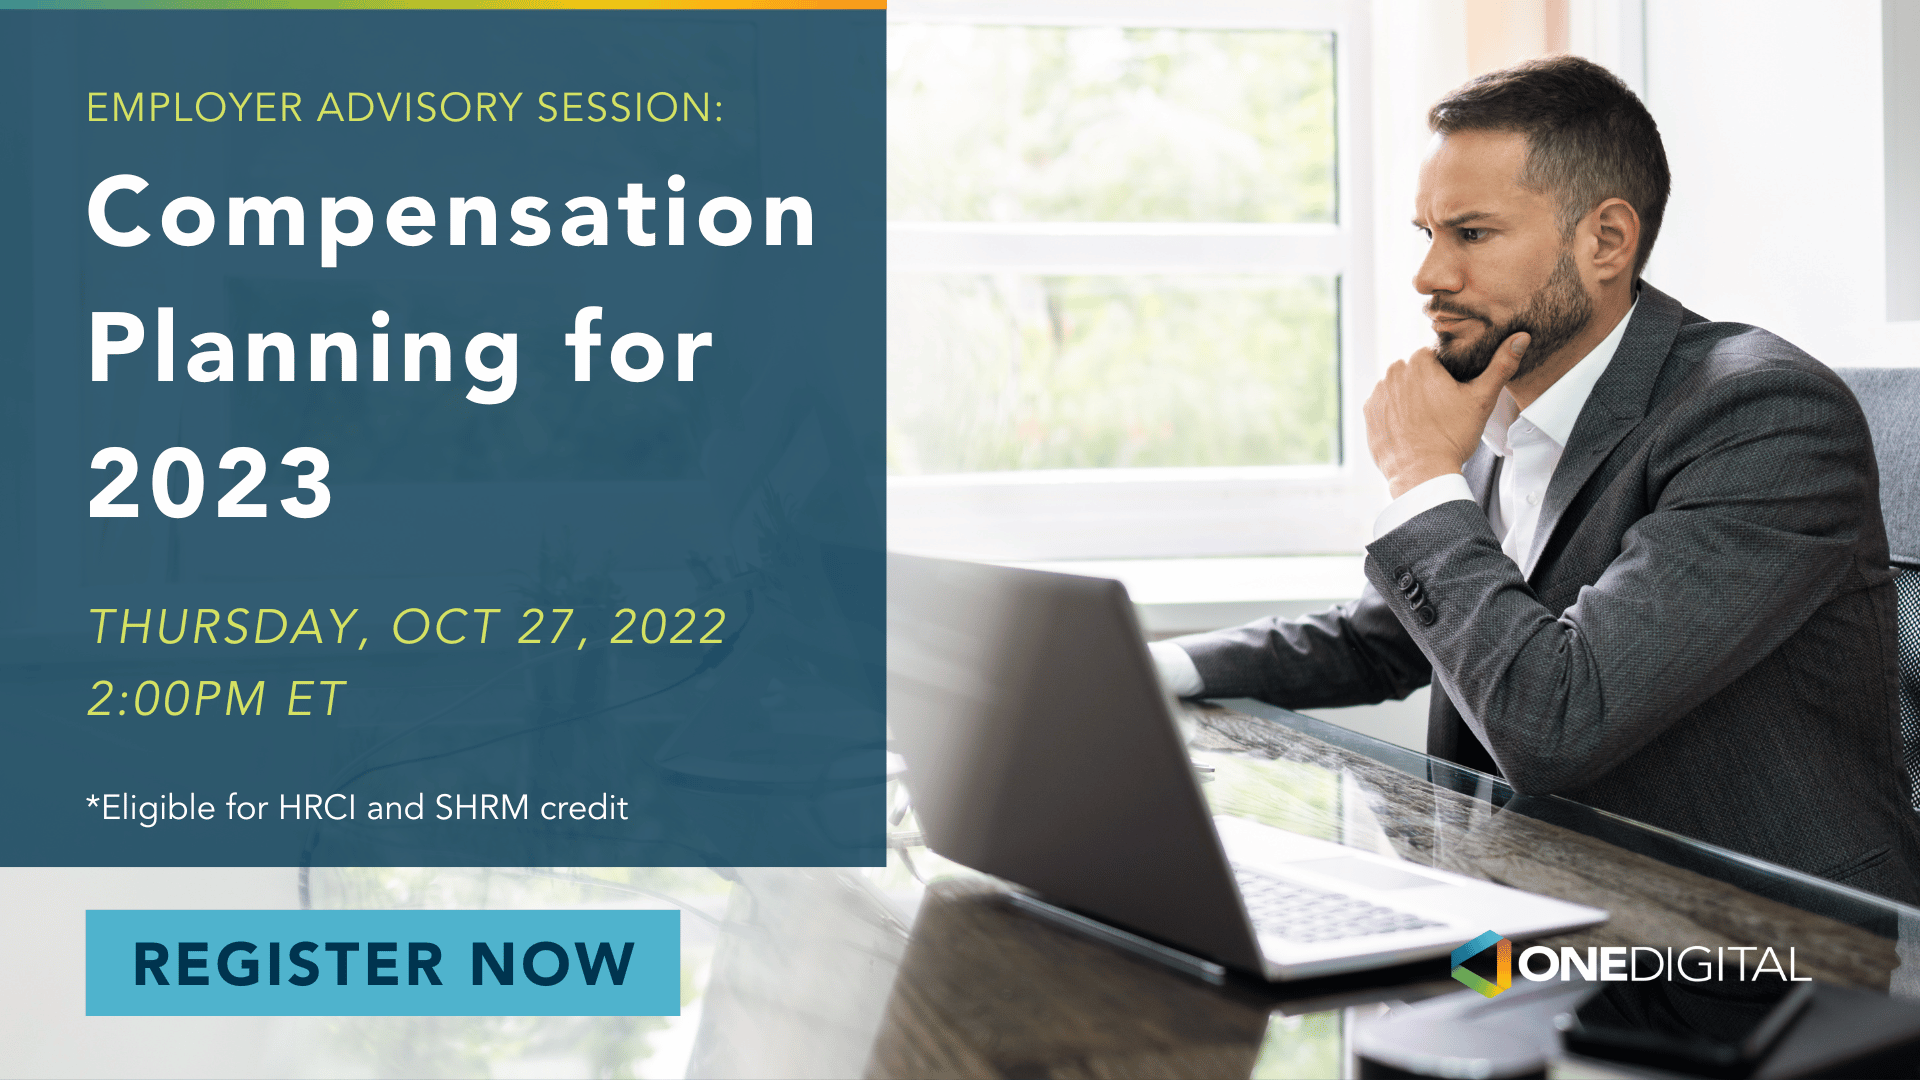 Employer Advisory Session: Compensation Planning for 2023